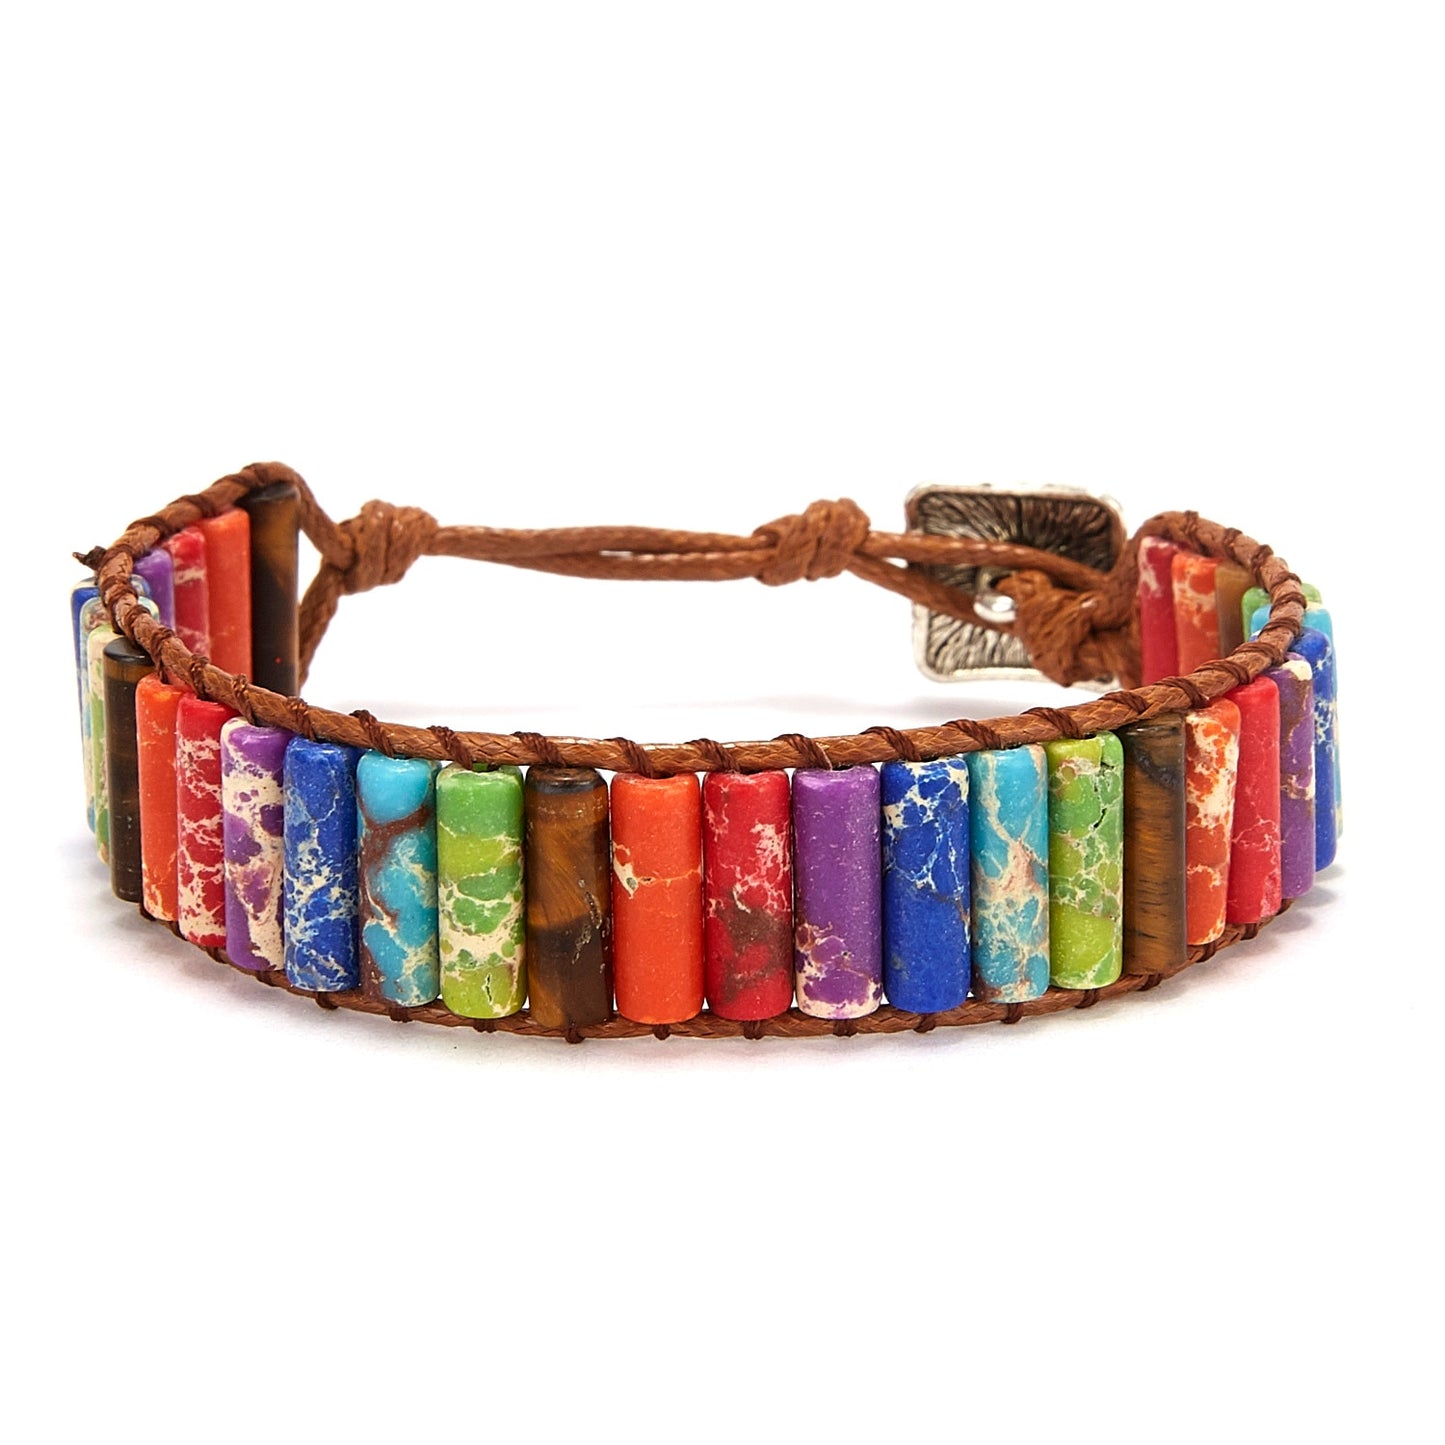 New Fashion Mixed Color Natural Stone Bracelet For Women Men Chakra Heart Wrap Leather Chain Bracelet&Bangle Charm Jewelry - BR18Y0734-3 / Adjustable